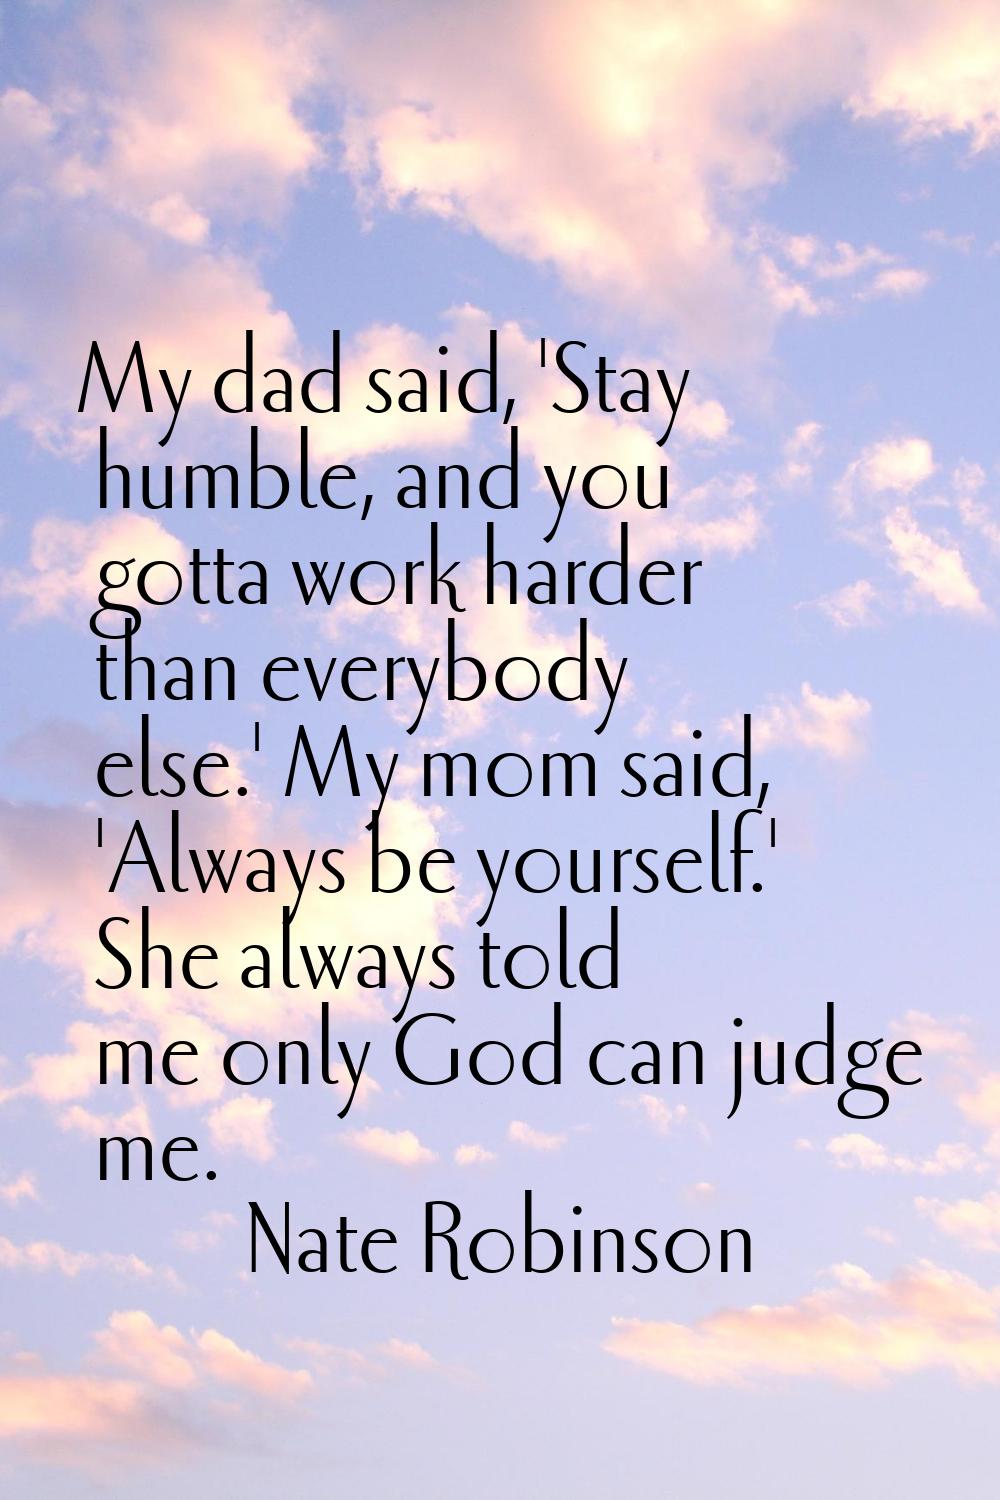 My dad said, 'Stay humble, and you gotta work harder than everybody else.' My mom said, 'Always be 